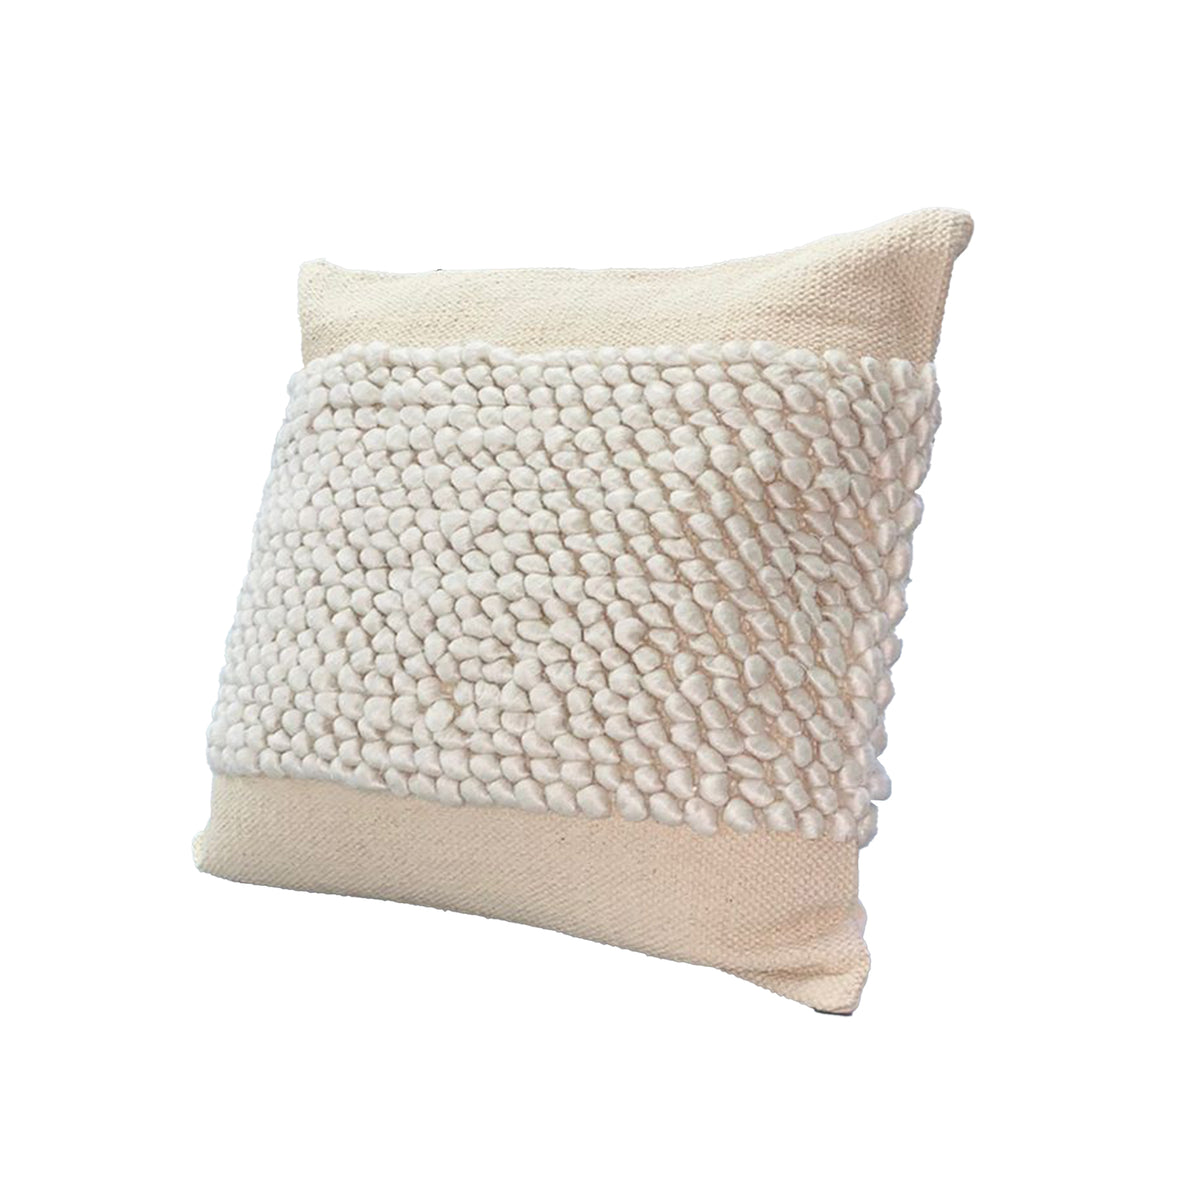 20x20" Square Cotton Accent Throw Pillow, Soft Banded Braided Patchwork - White, Cream